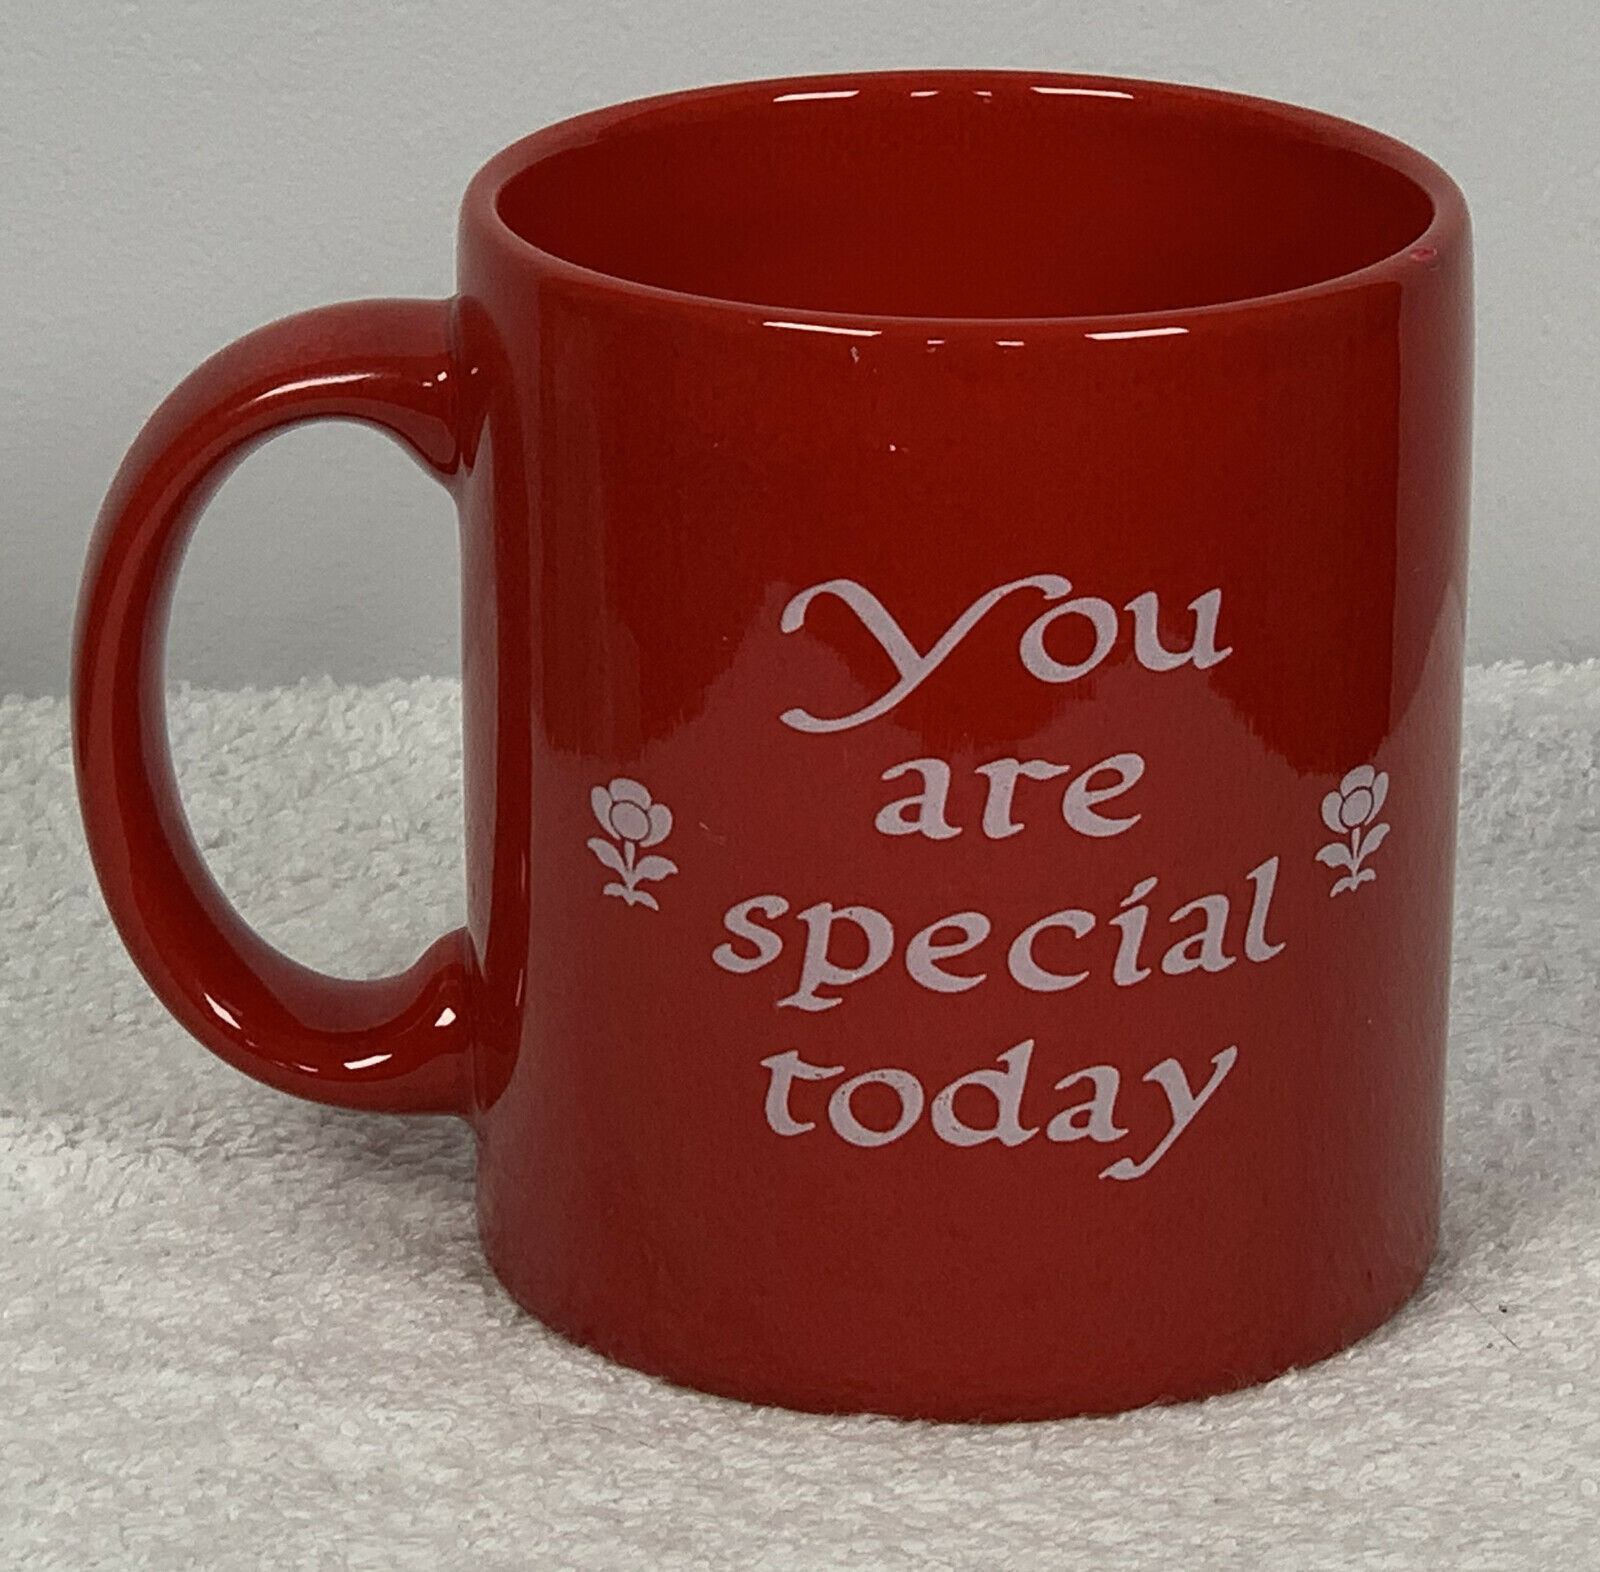 Waechtersbach You Are Special Today Ceramic Coffee Mug Red Germany - $21.73